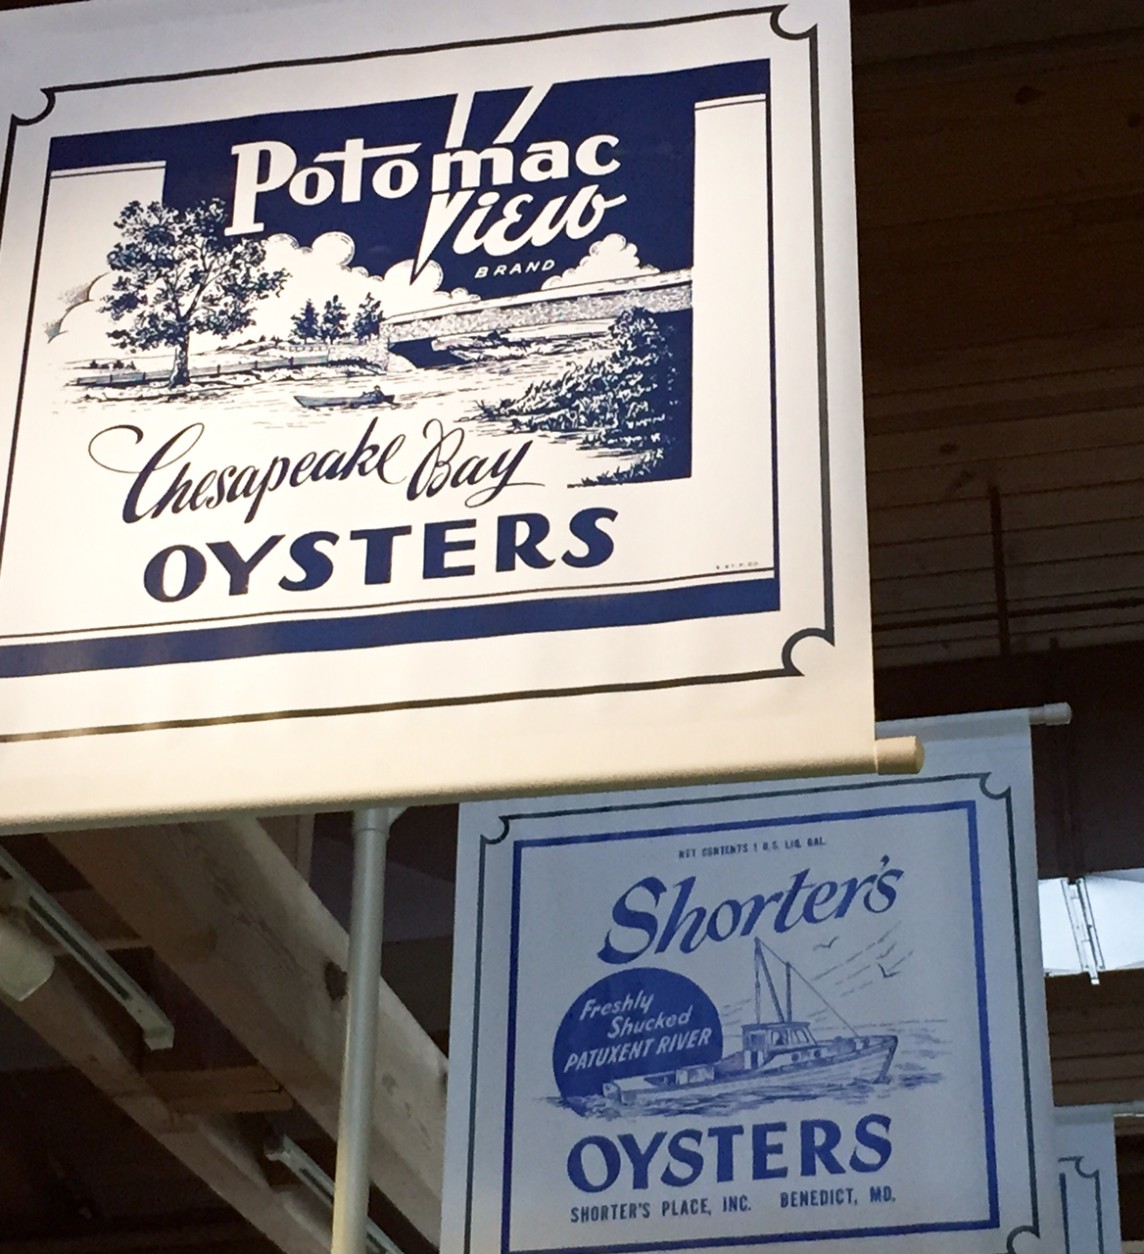 Oyster signs from the Chesapeake Bay Maritime Museum in Solomons, Md. (WTOP/Kate Ryan)